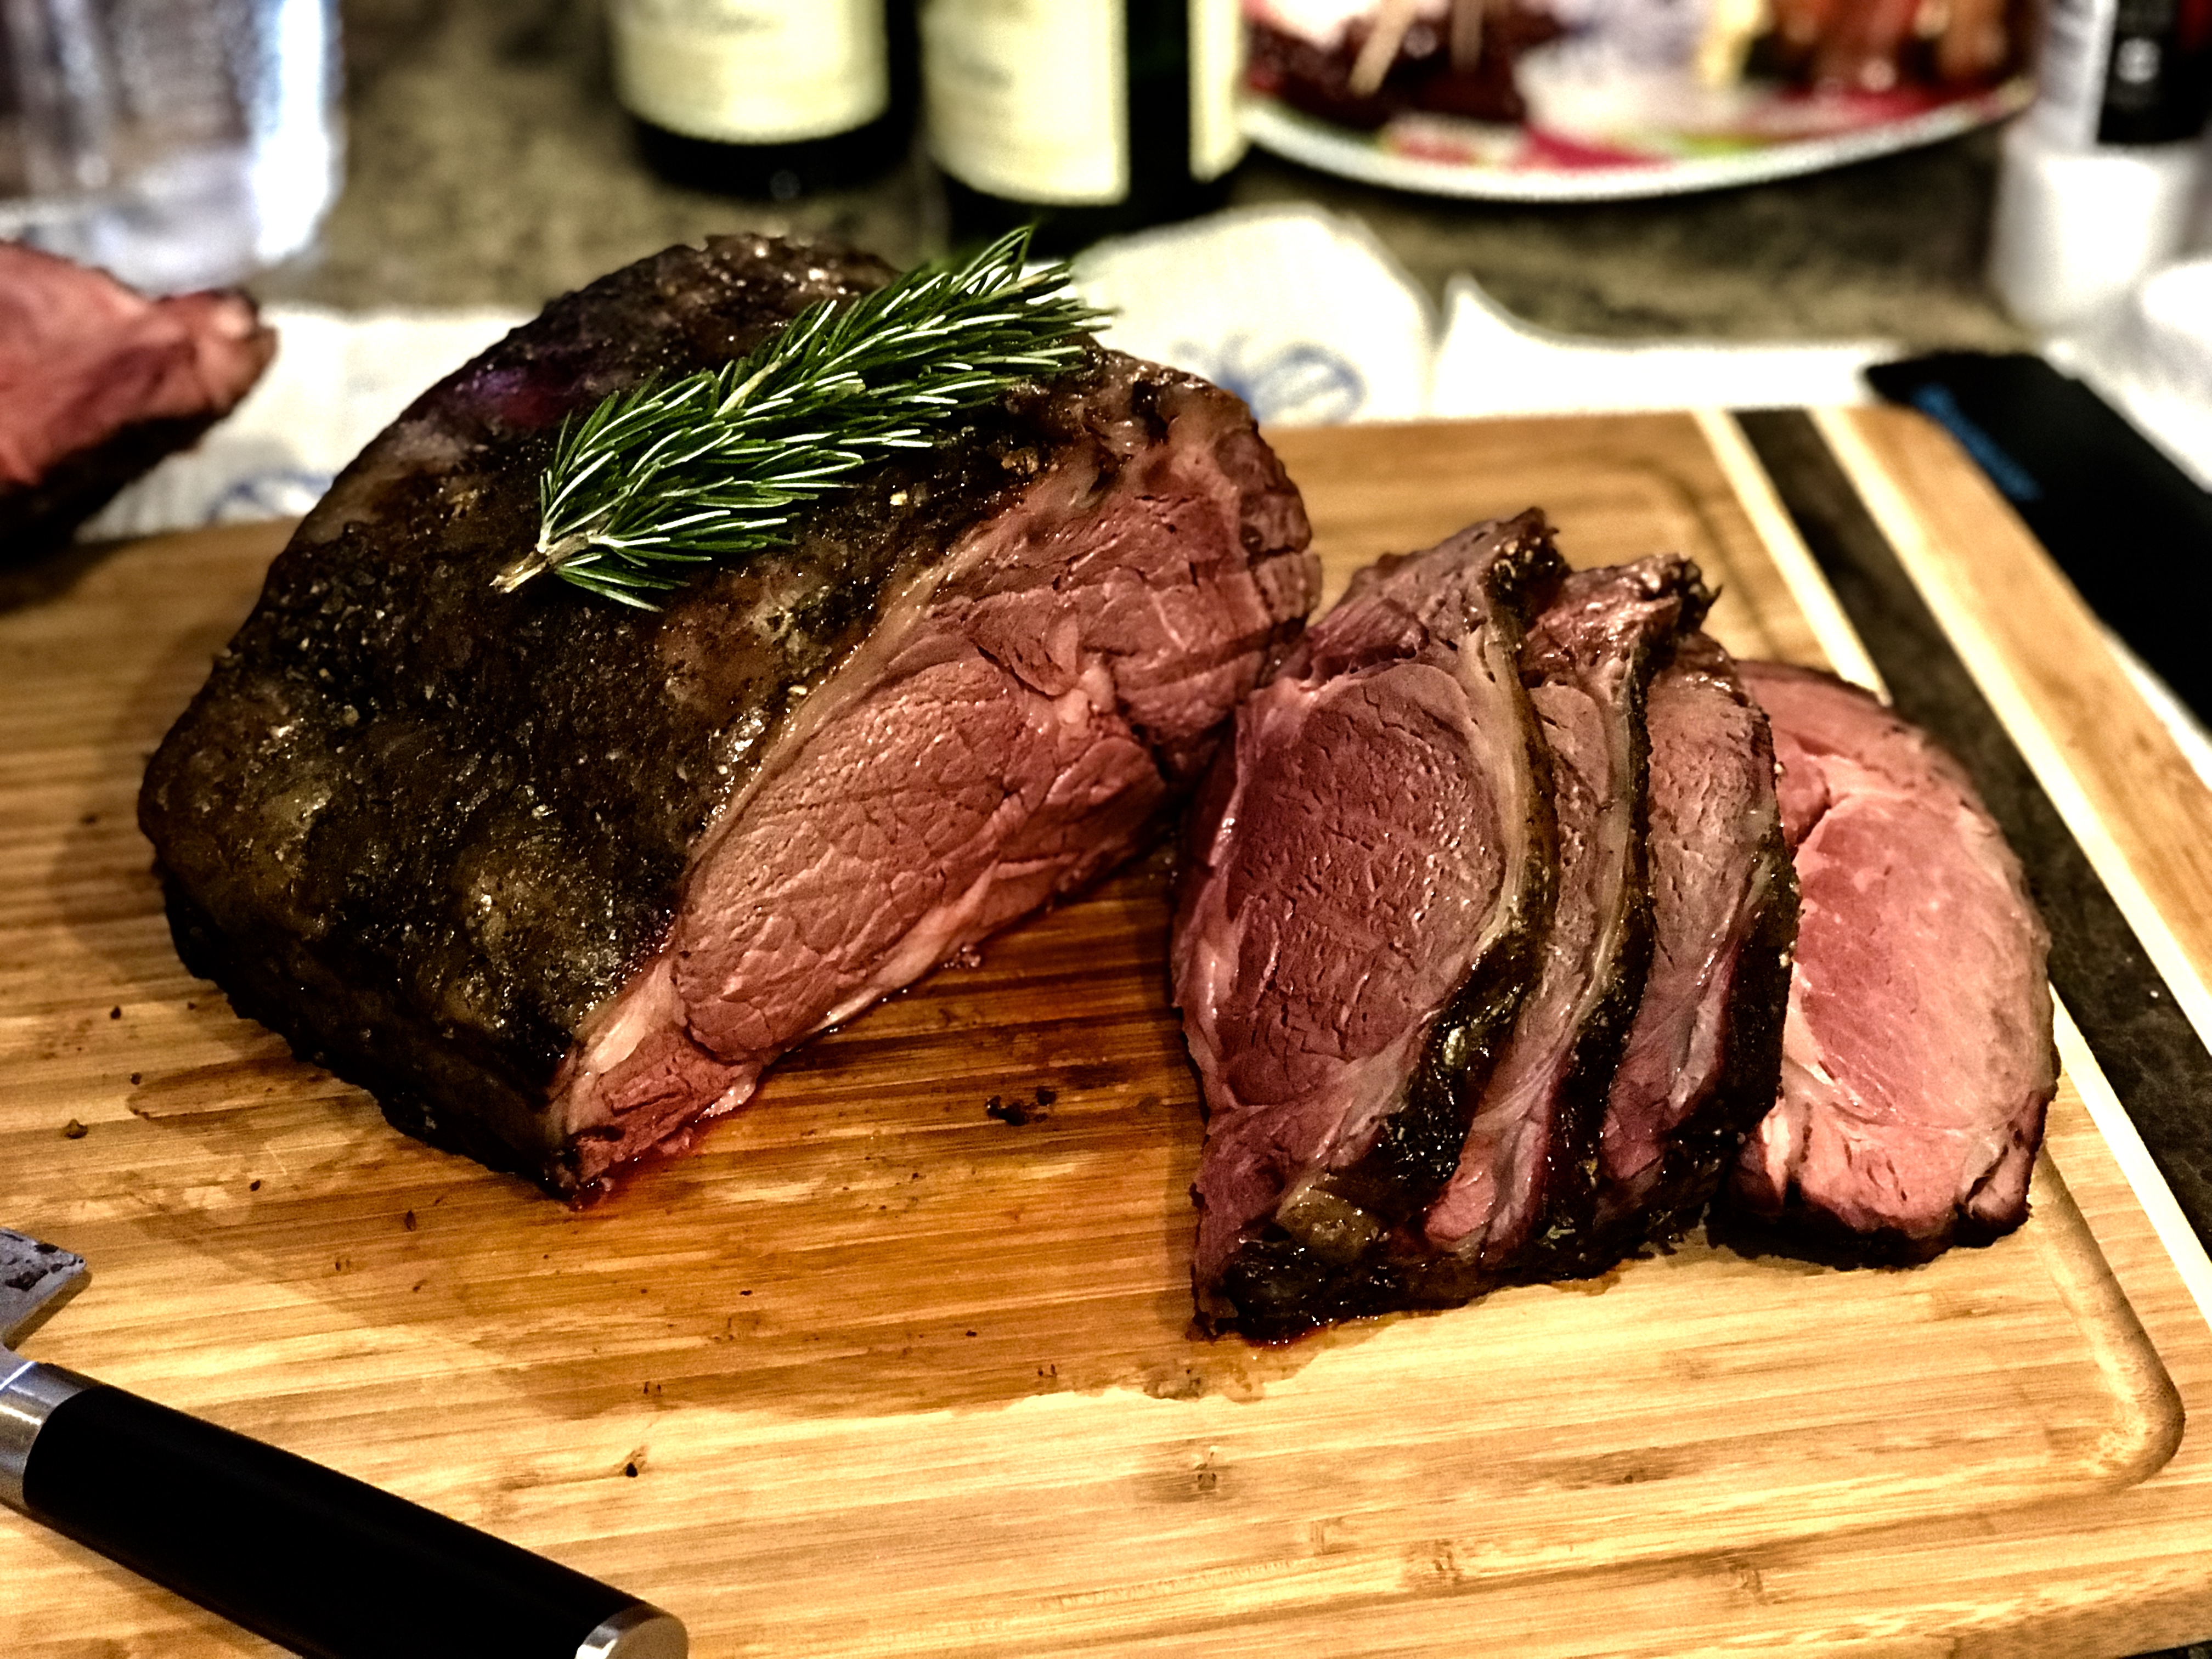 Herb Butter Smoked Prime Rib Your Go To Prime Rib Recipe Slowpoke Cooking,Sauteed Mushrooms Png